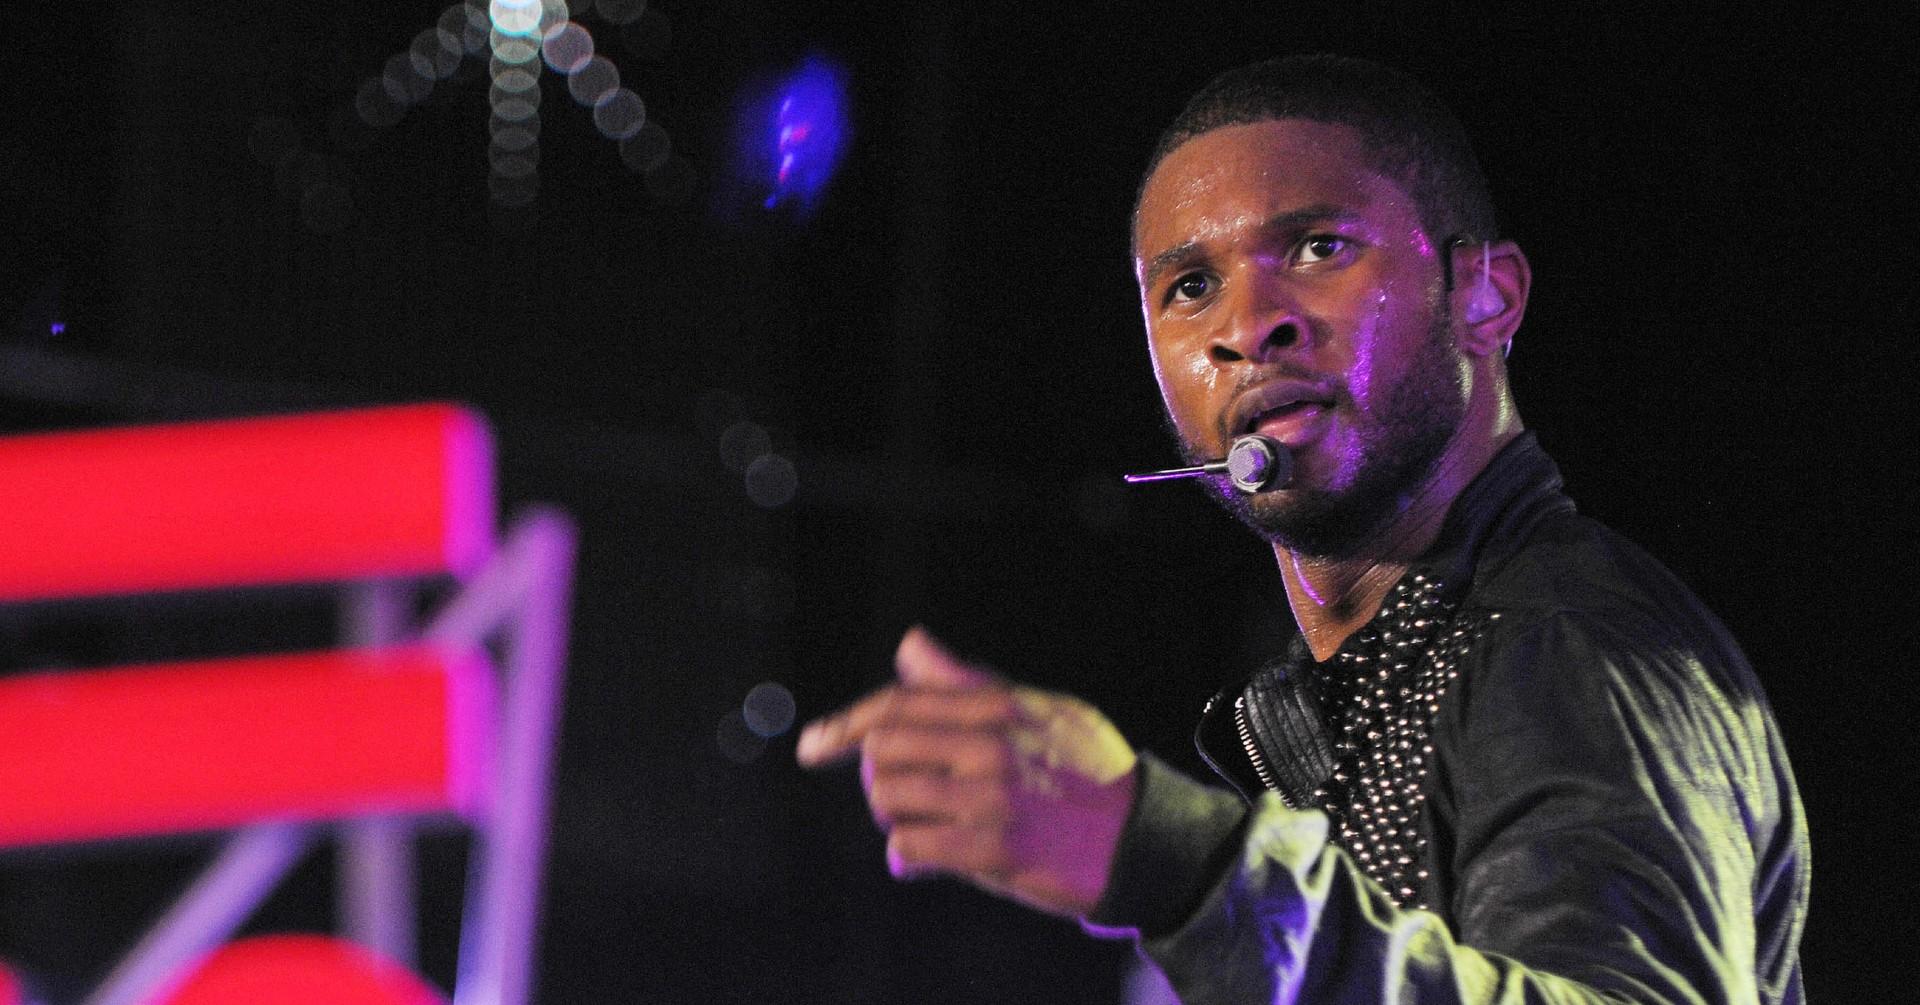 Usher strips down for Skims campaign ahead of Super Bowl half-time show